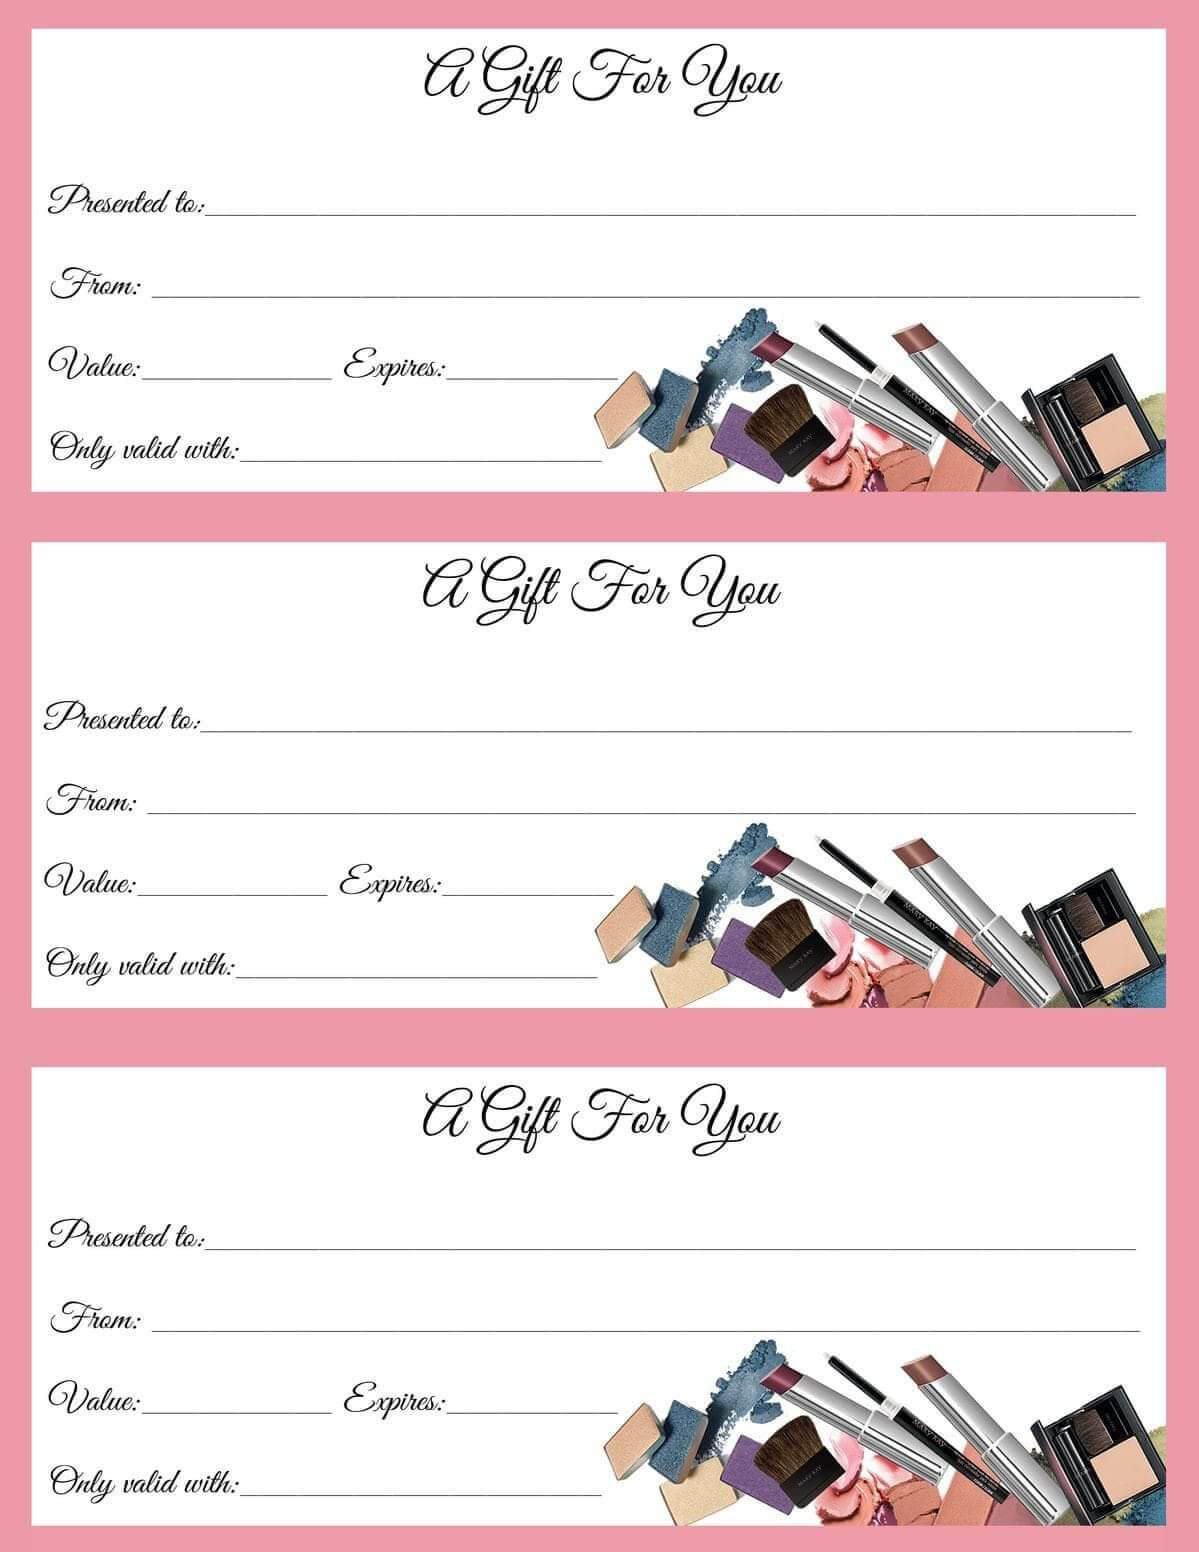 Pingwen Hurd On Mary Kay Products And Info | Mary Kay For Mary Kay Gift Certificate Template